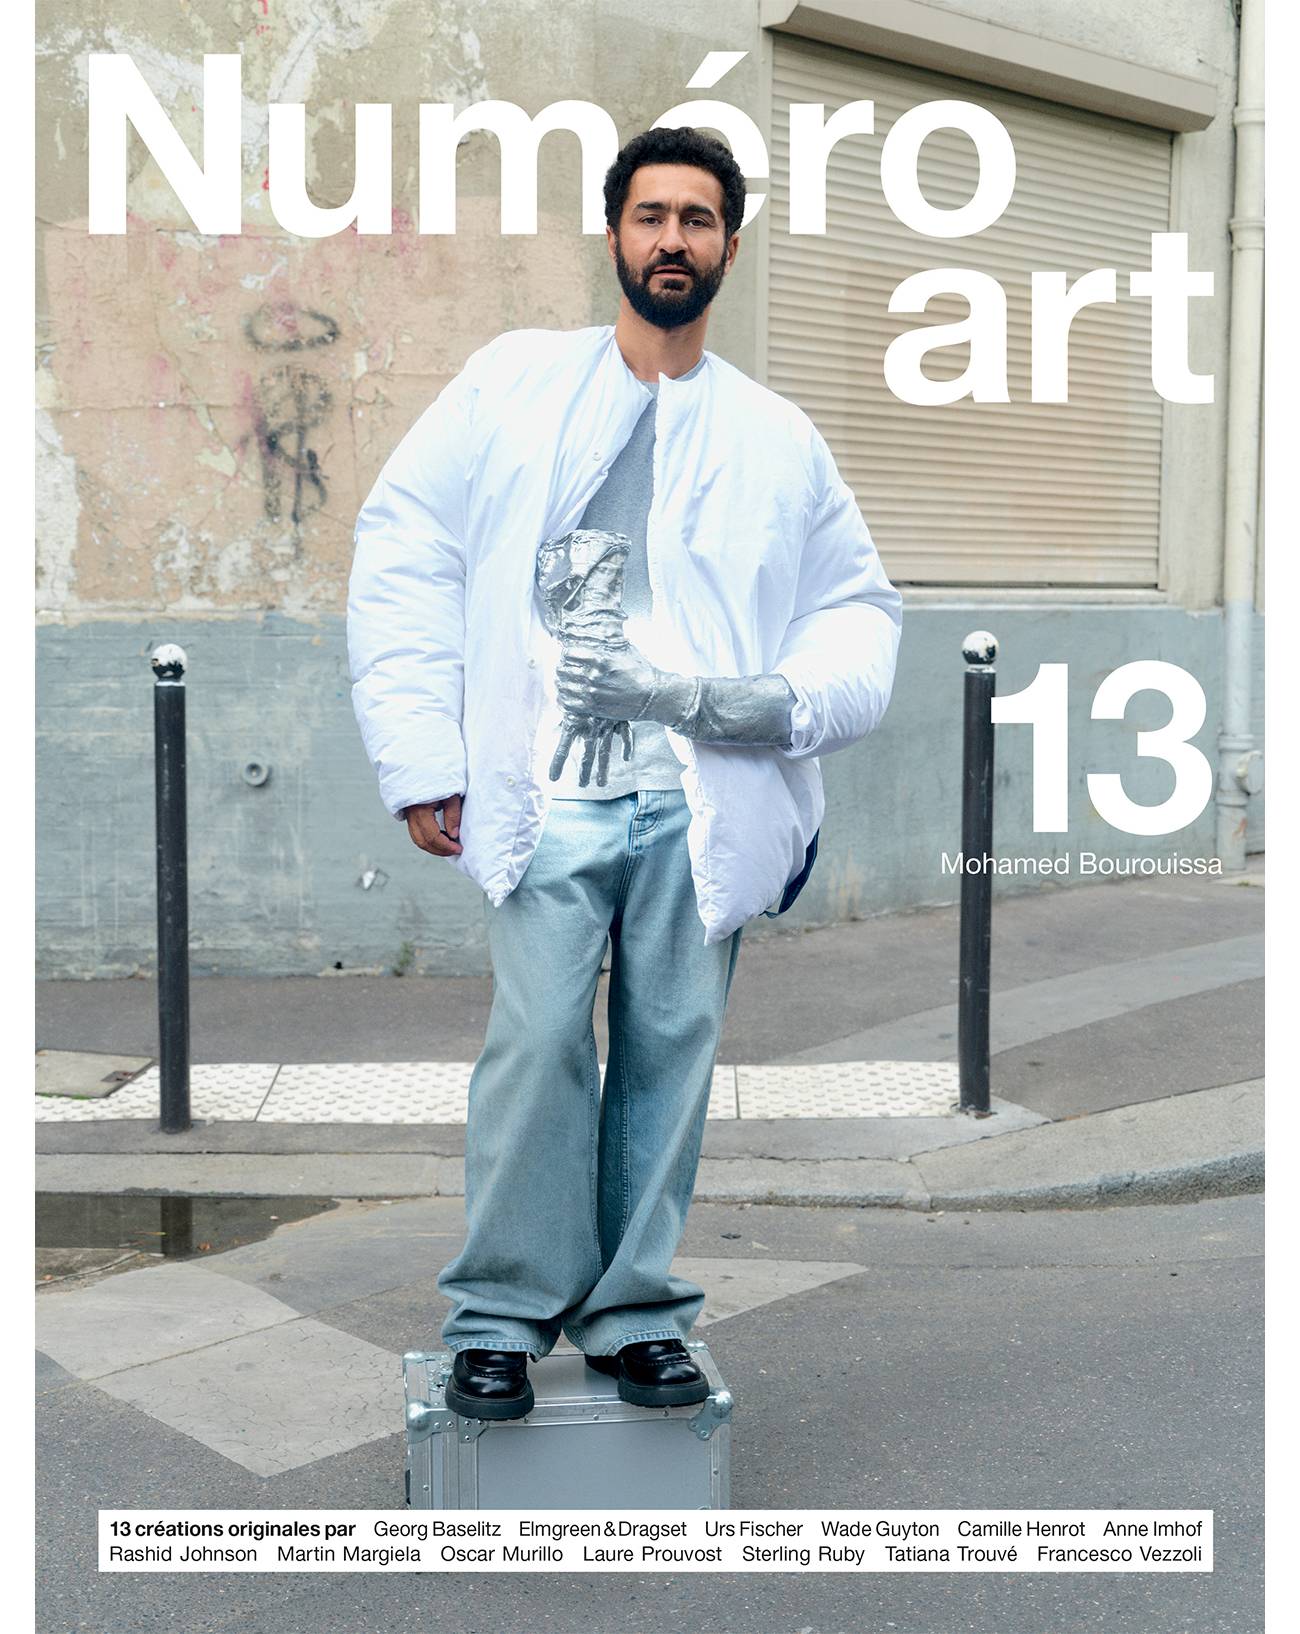 Who is Mohamed Bourouissa, one of the greatest artists of his generation featured on the cover of Numéro art 13?